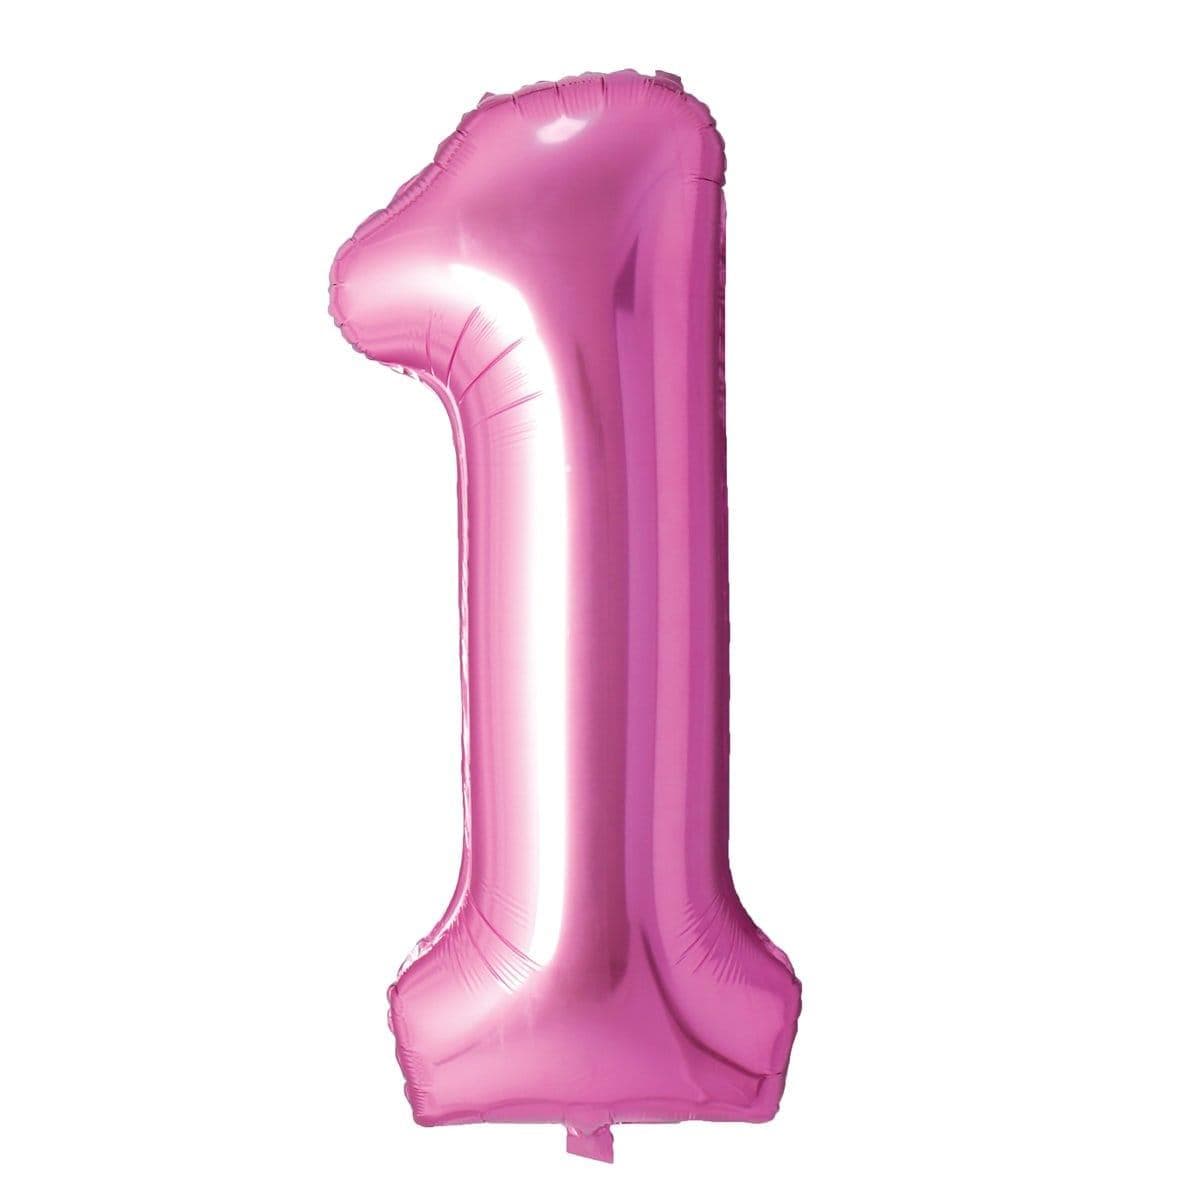 Buy Balloons Pink Number 1 Foil Balloon, 34 Inches sold at Party Expert